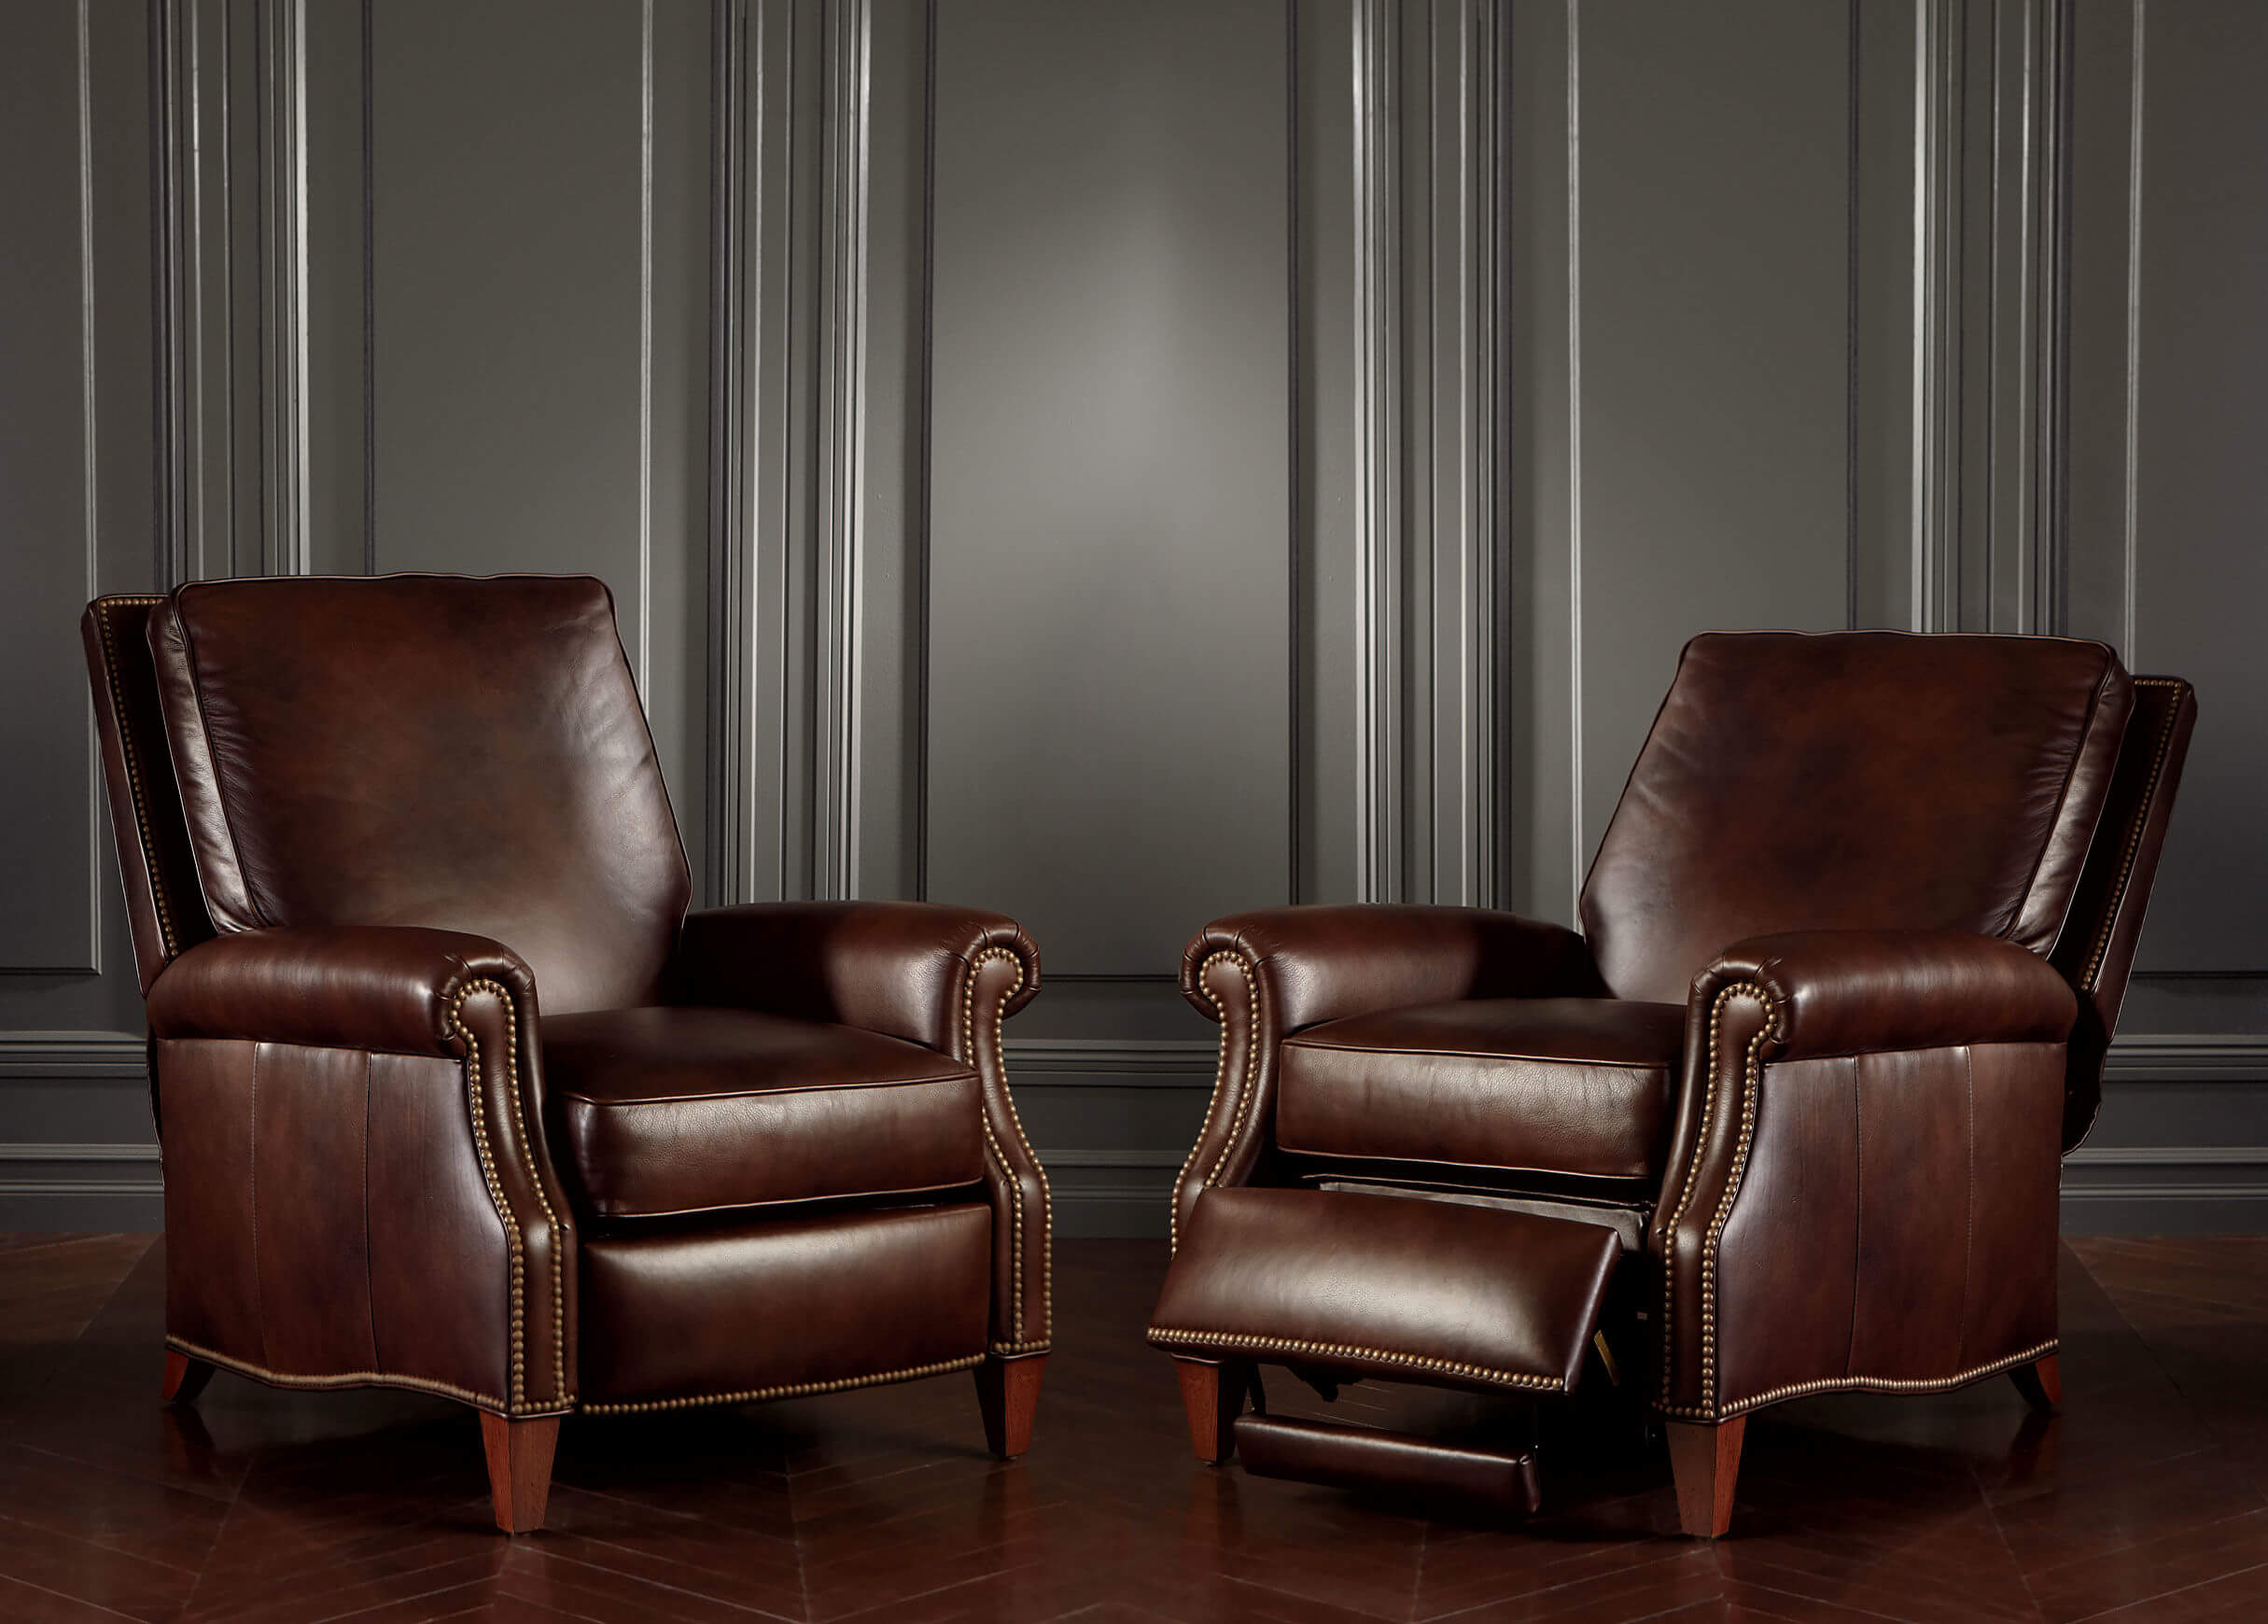 Luxury Leather Arm Chair Recliners, Leather Chairs Recliners